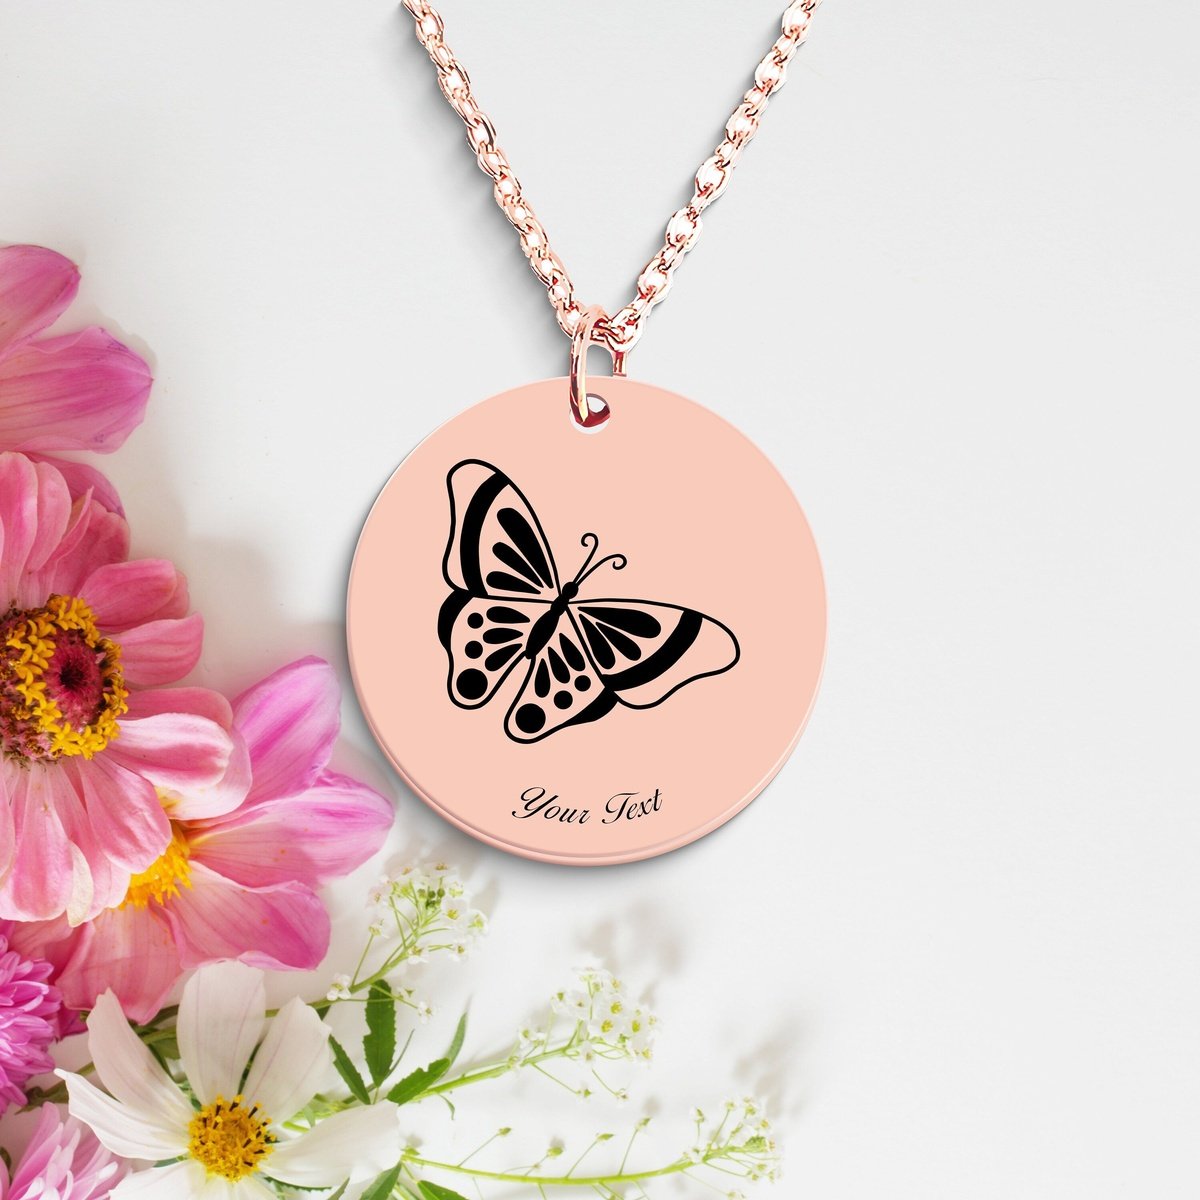 Butterfly Necklace, Your Name Necklace, Minimalist Necklace, Personalized Gift, Silver Necklace, Gift For Him Her